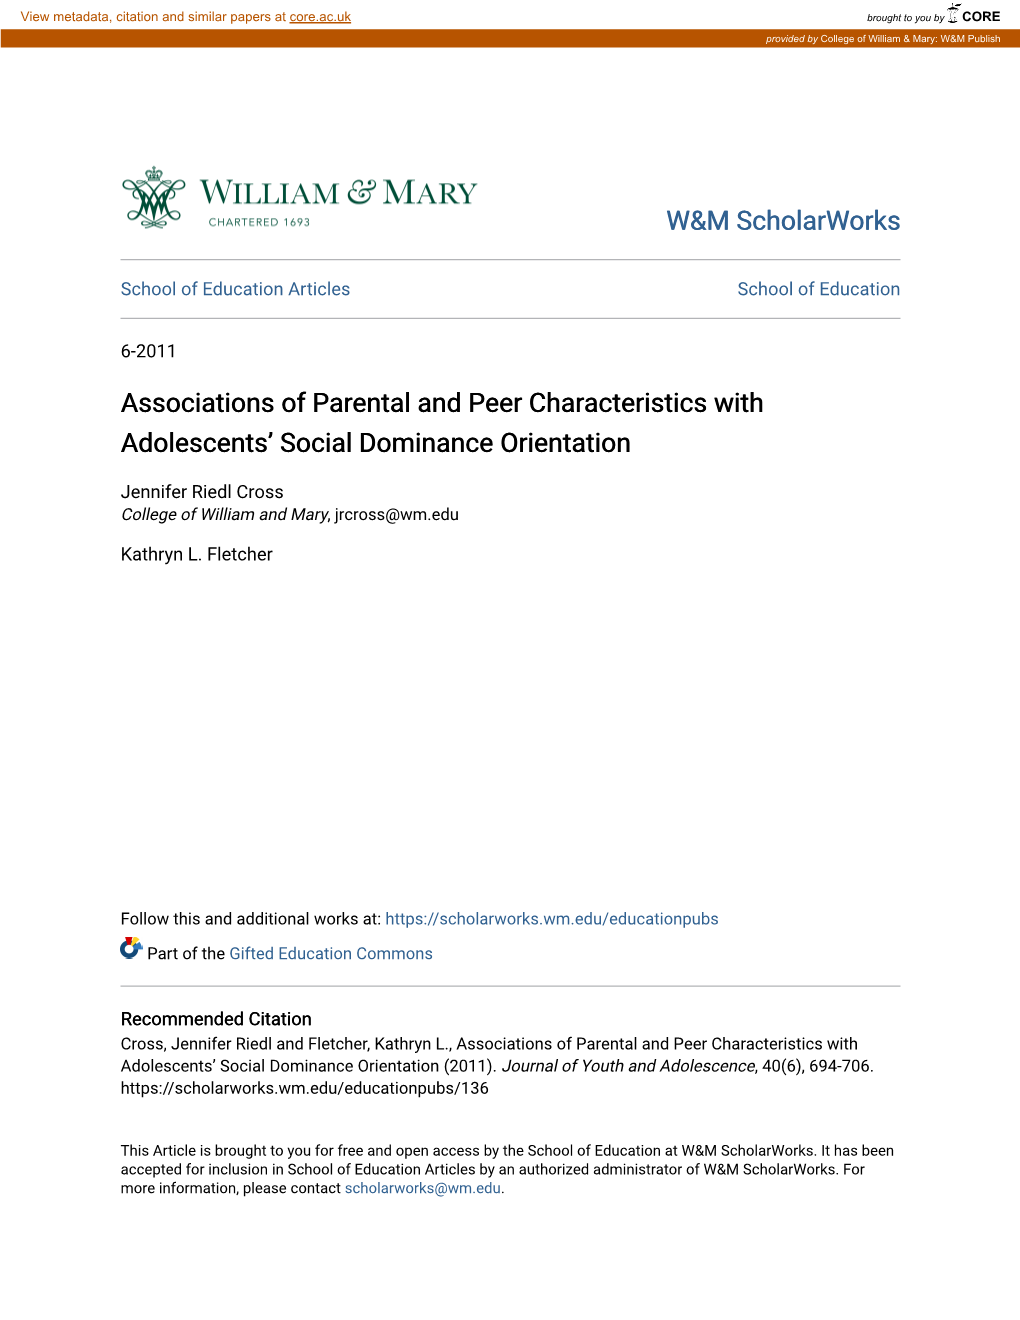 Associations of Parental and Peer Characteristics with Adolescents' Social Dominance Orientation